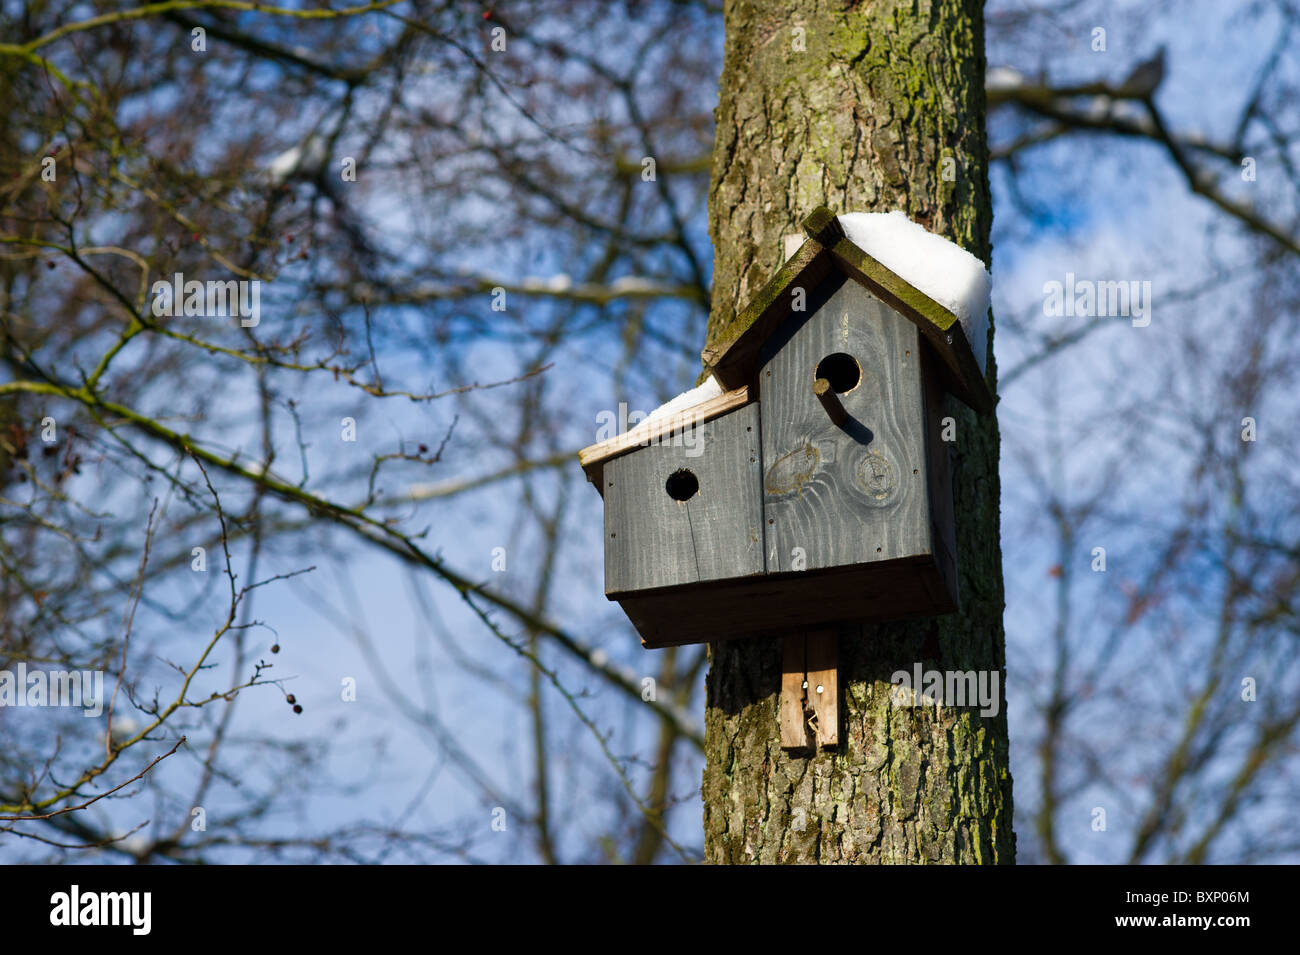 Bird house at the tree with snow in winter time Stock Photo